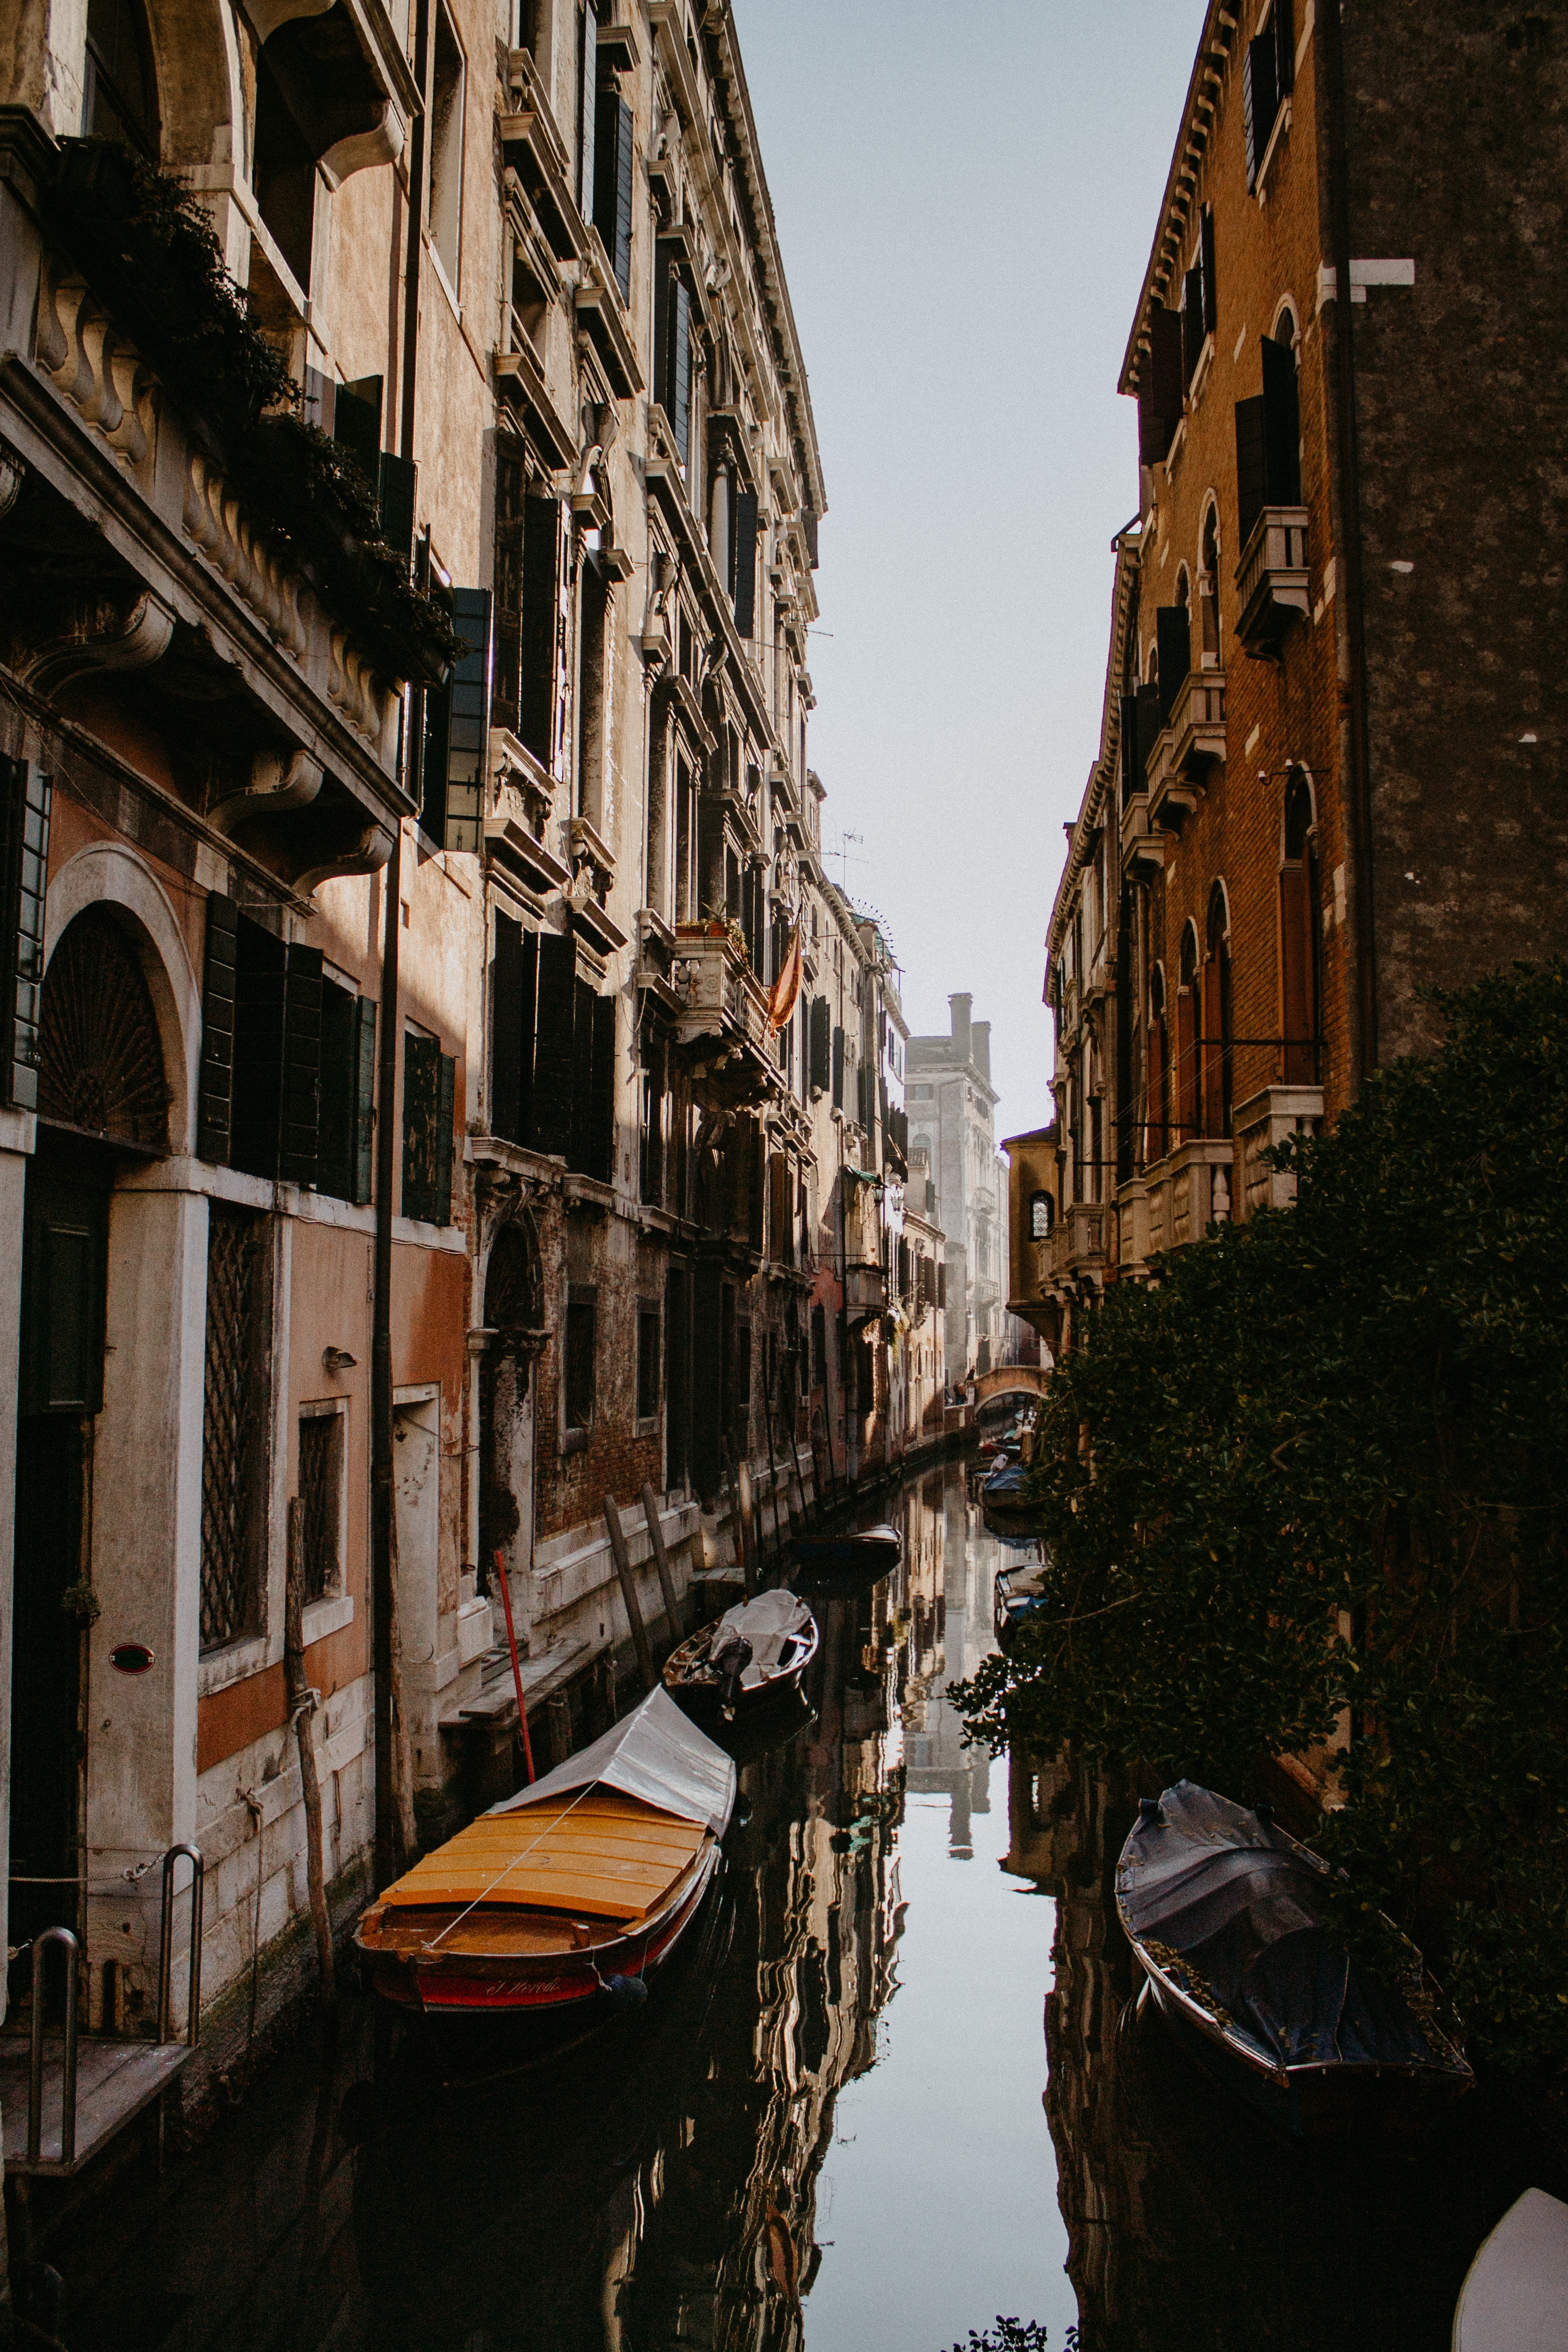 cities, rivers, boat, street, facades